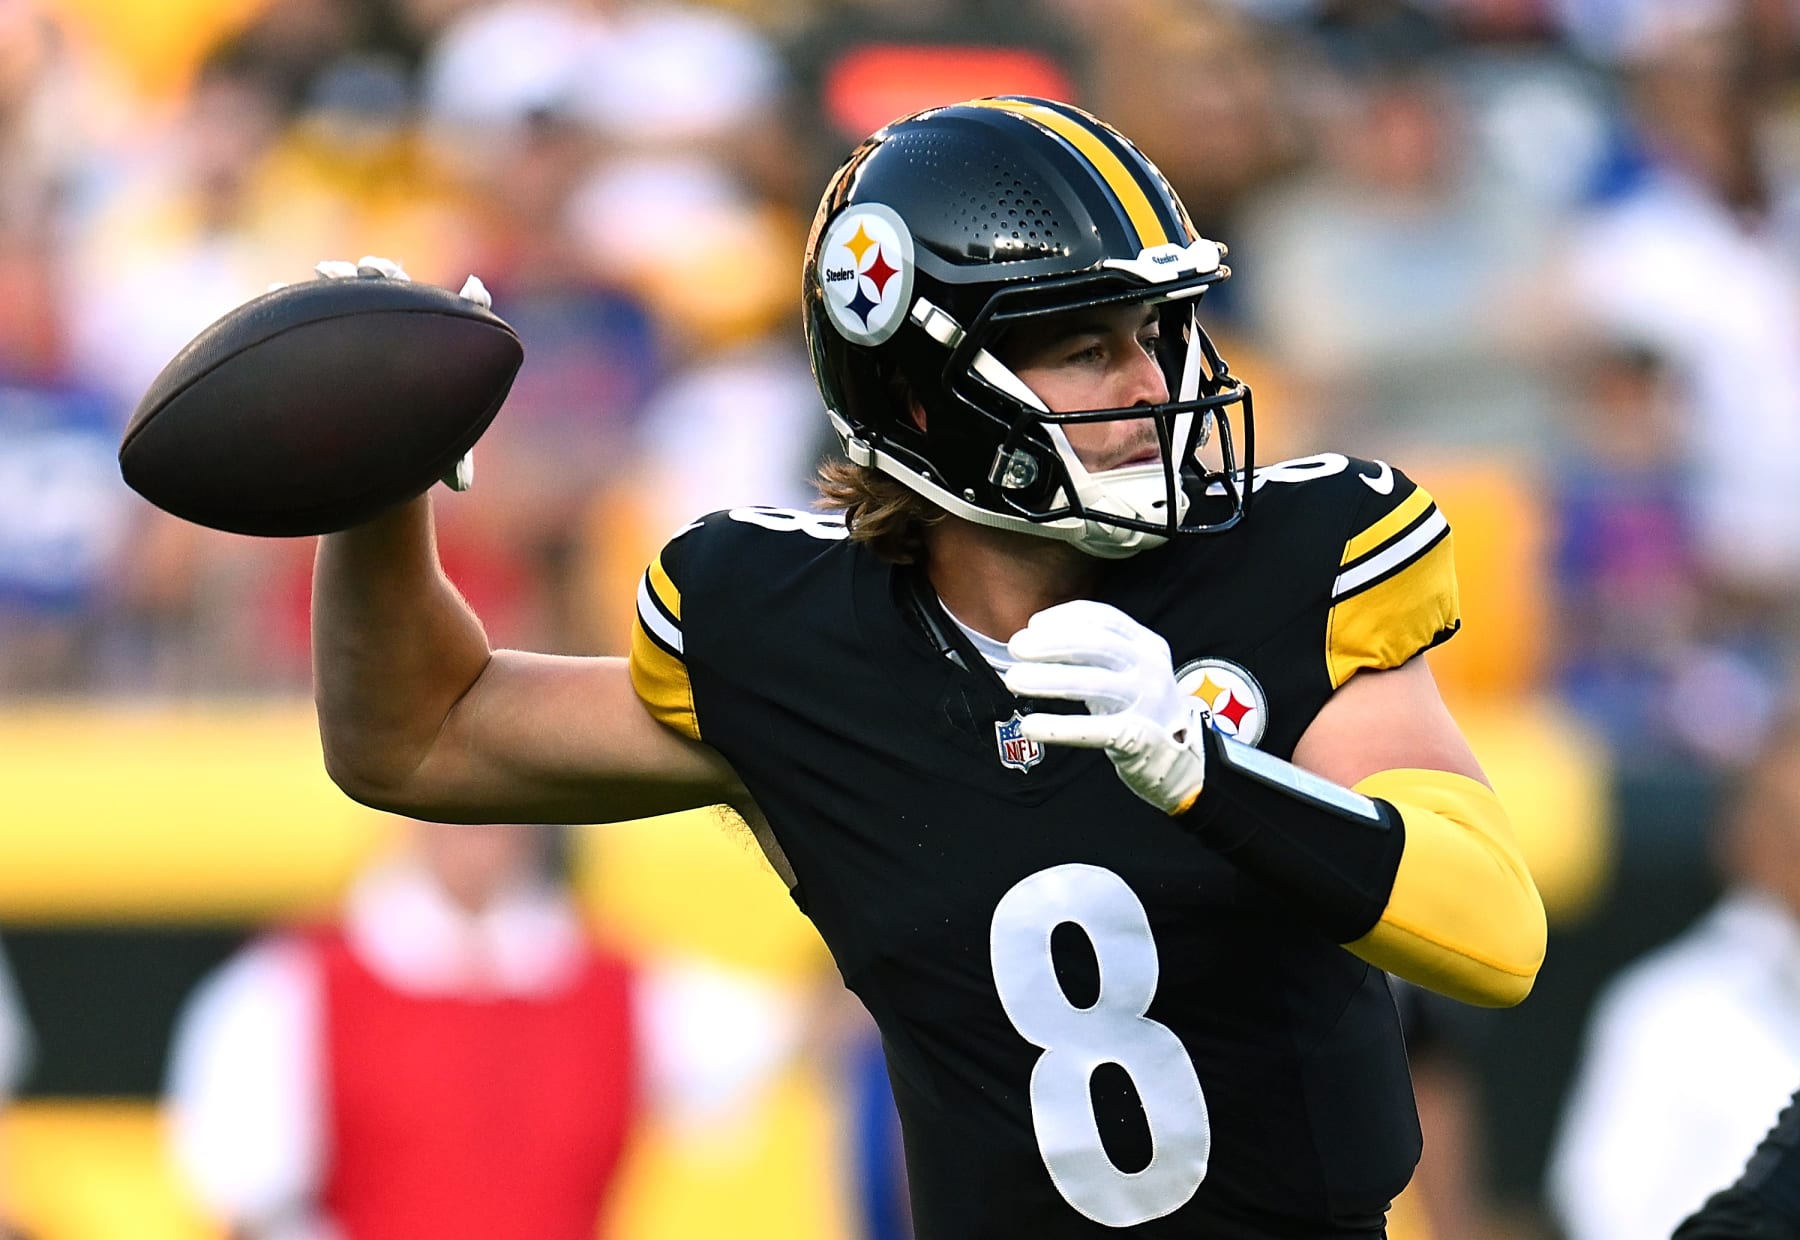 Steelers vs. KC Chiefs: 5 things to watch for in NFL preseason